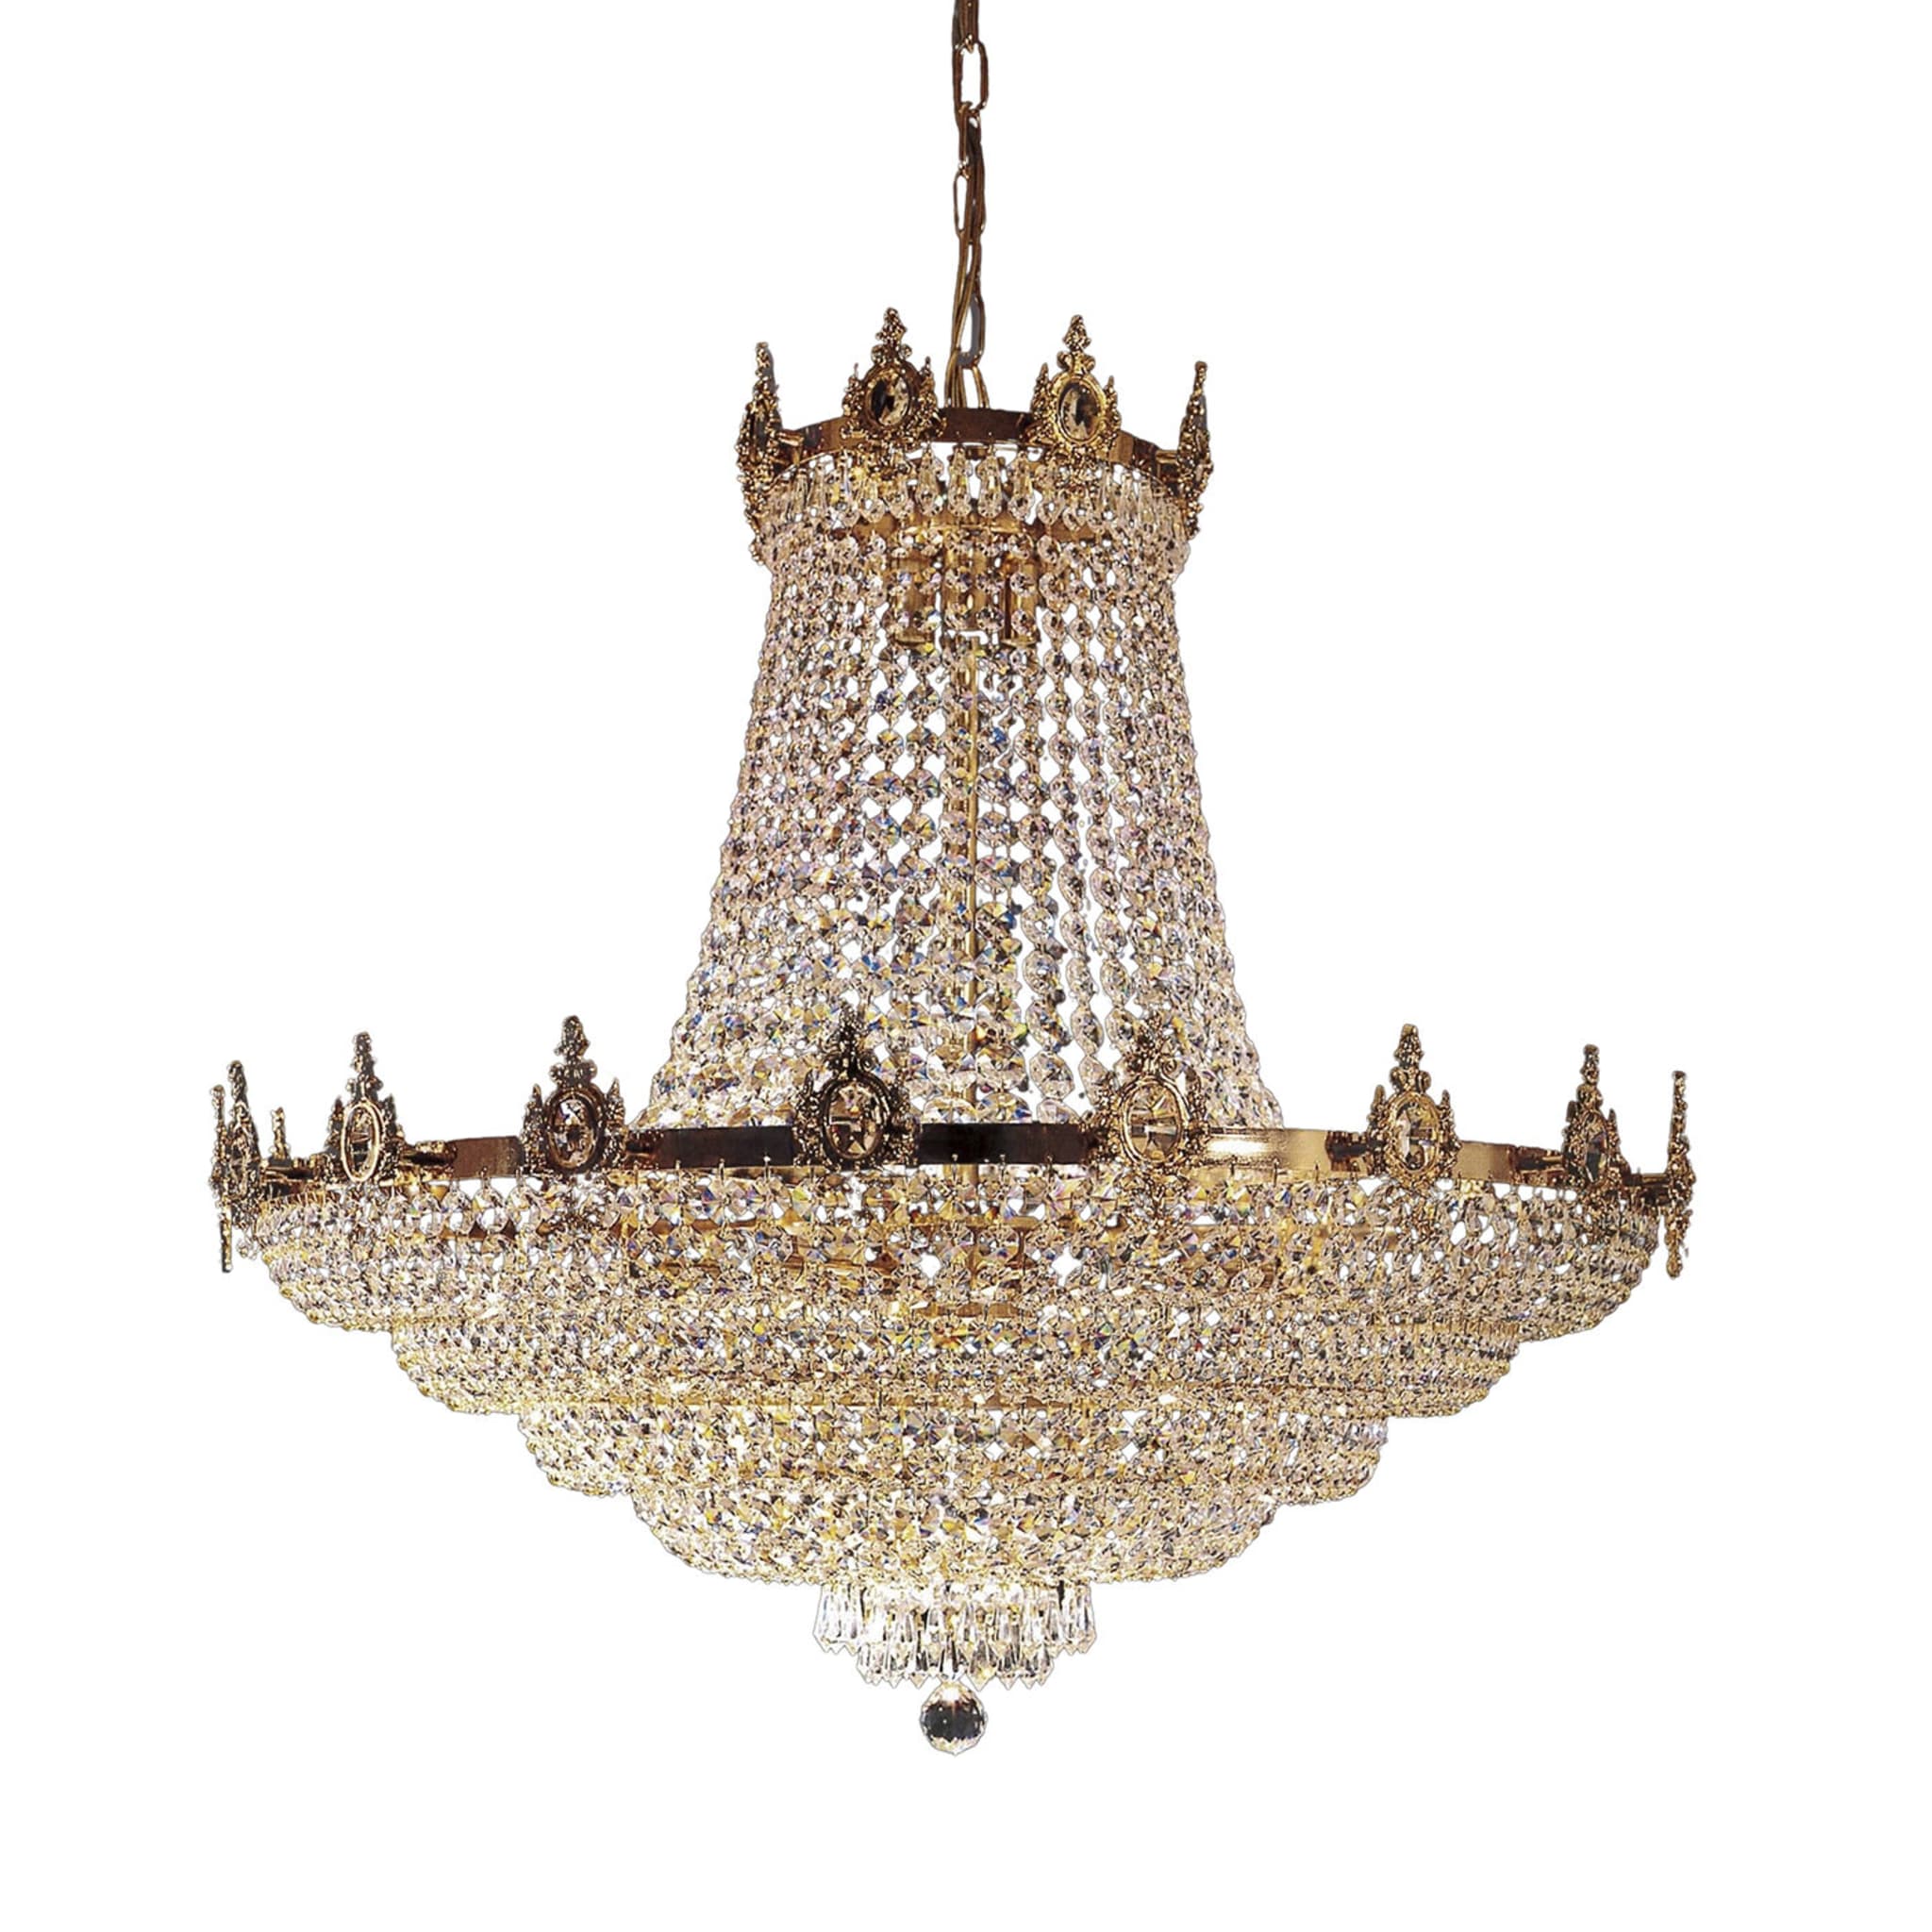 Impero 24-Light Chandelier #1 - Main view